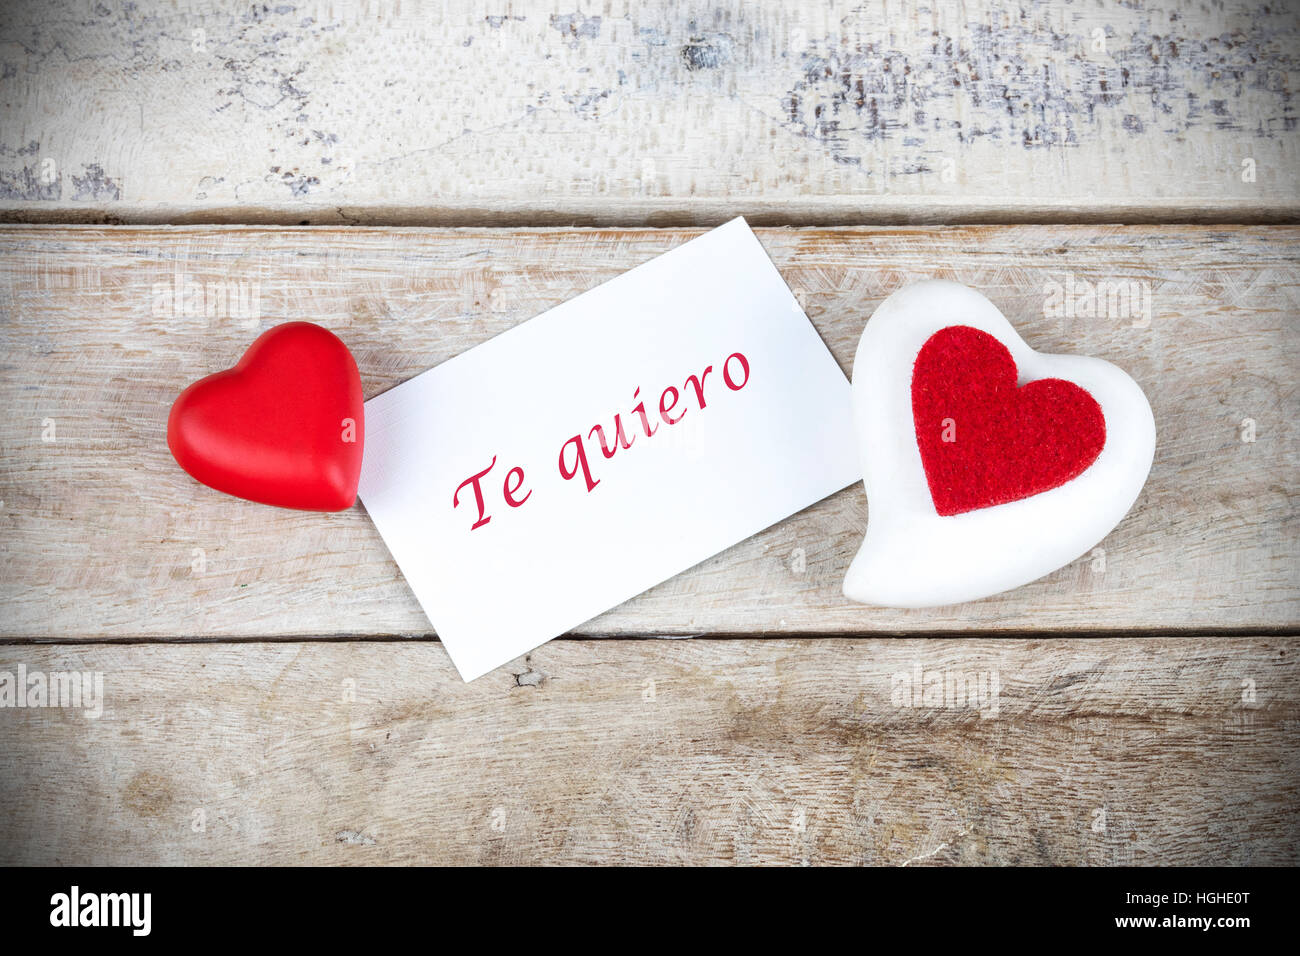 Valentine greeting card on wooden table with text written in spanish 'Te quiero', which means 'I love you'. Stock Photo